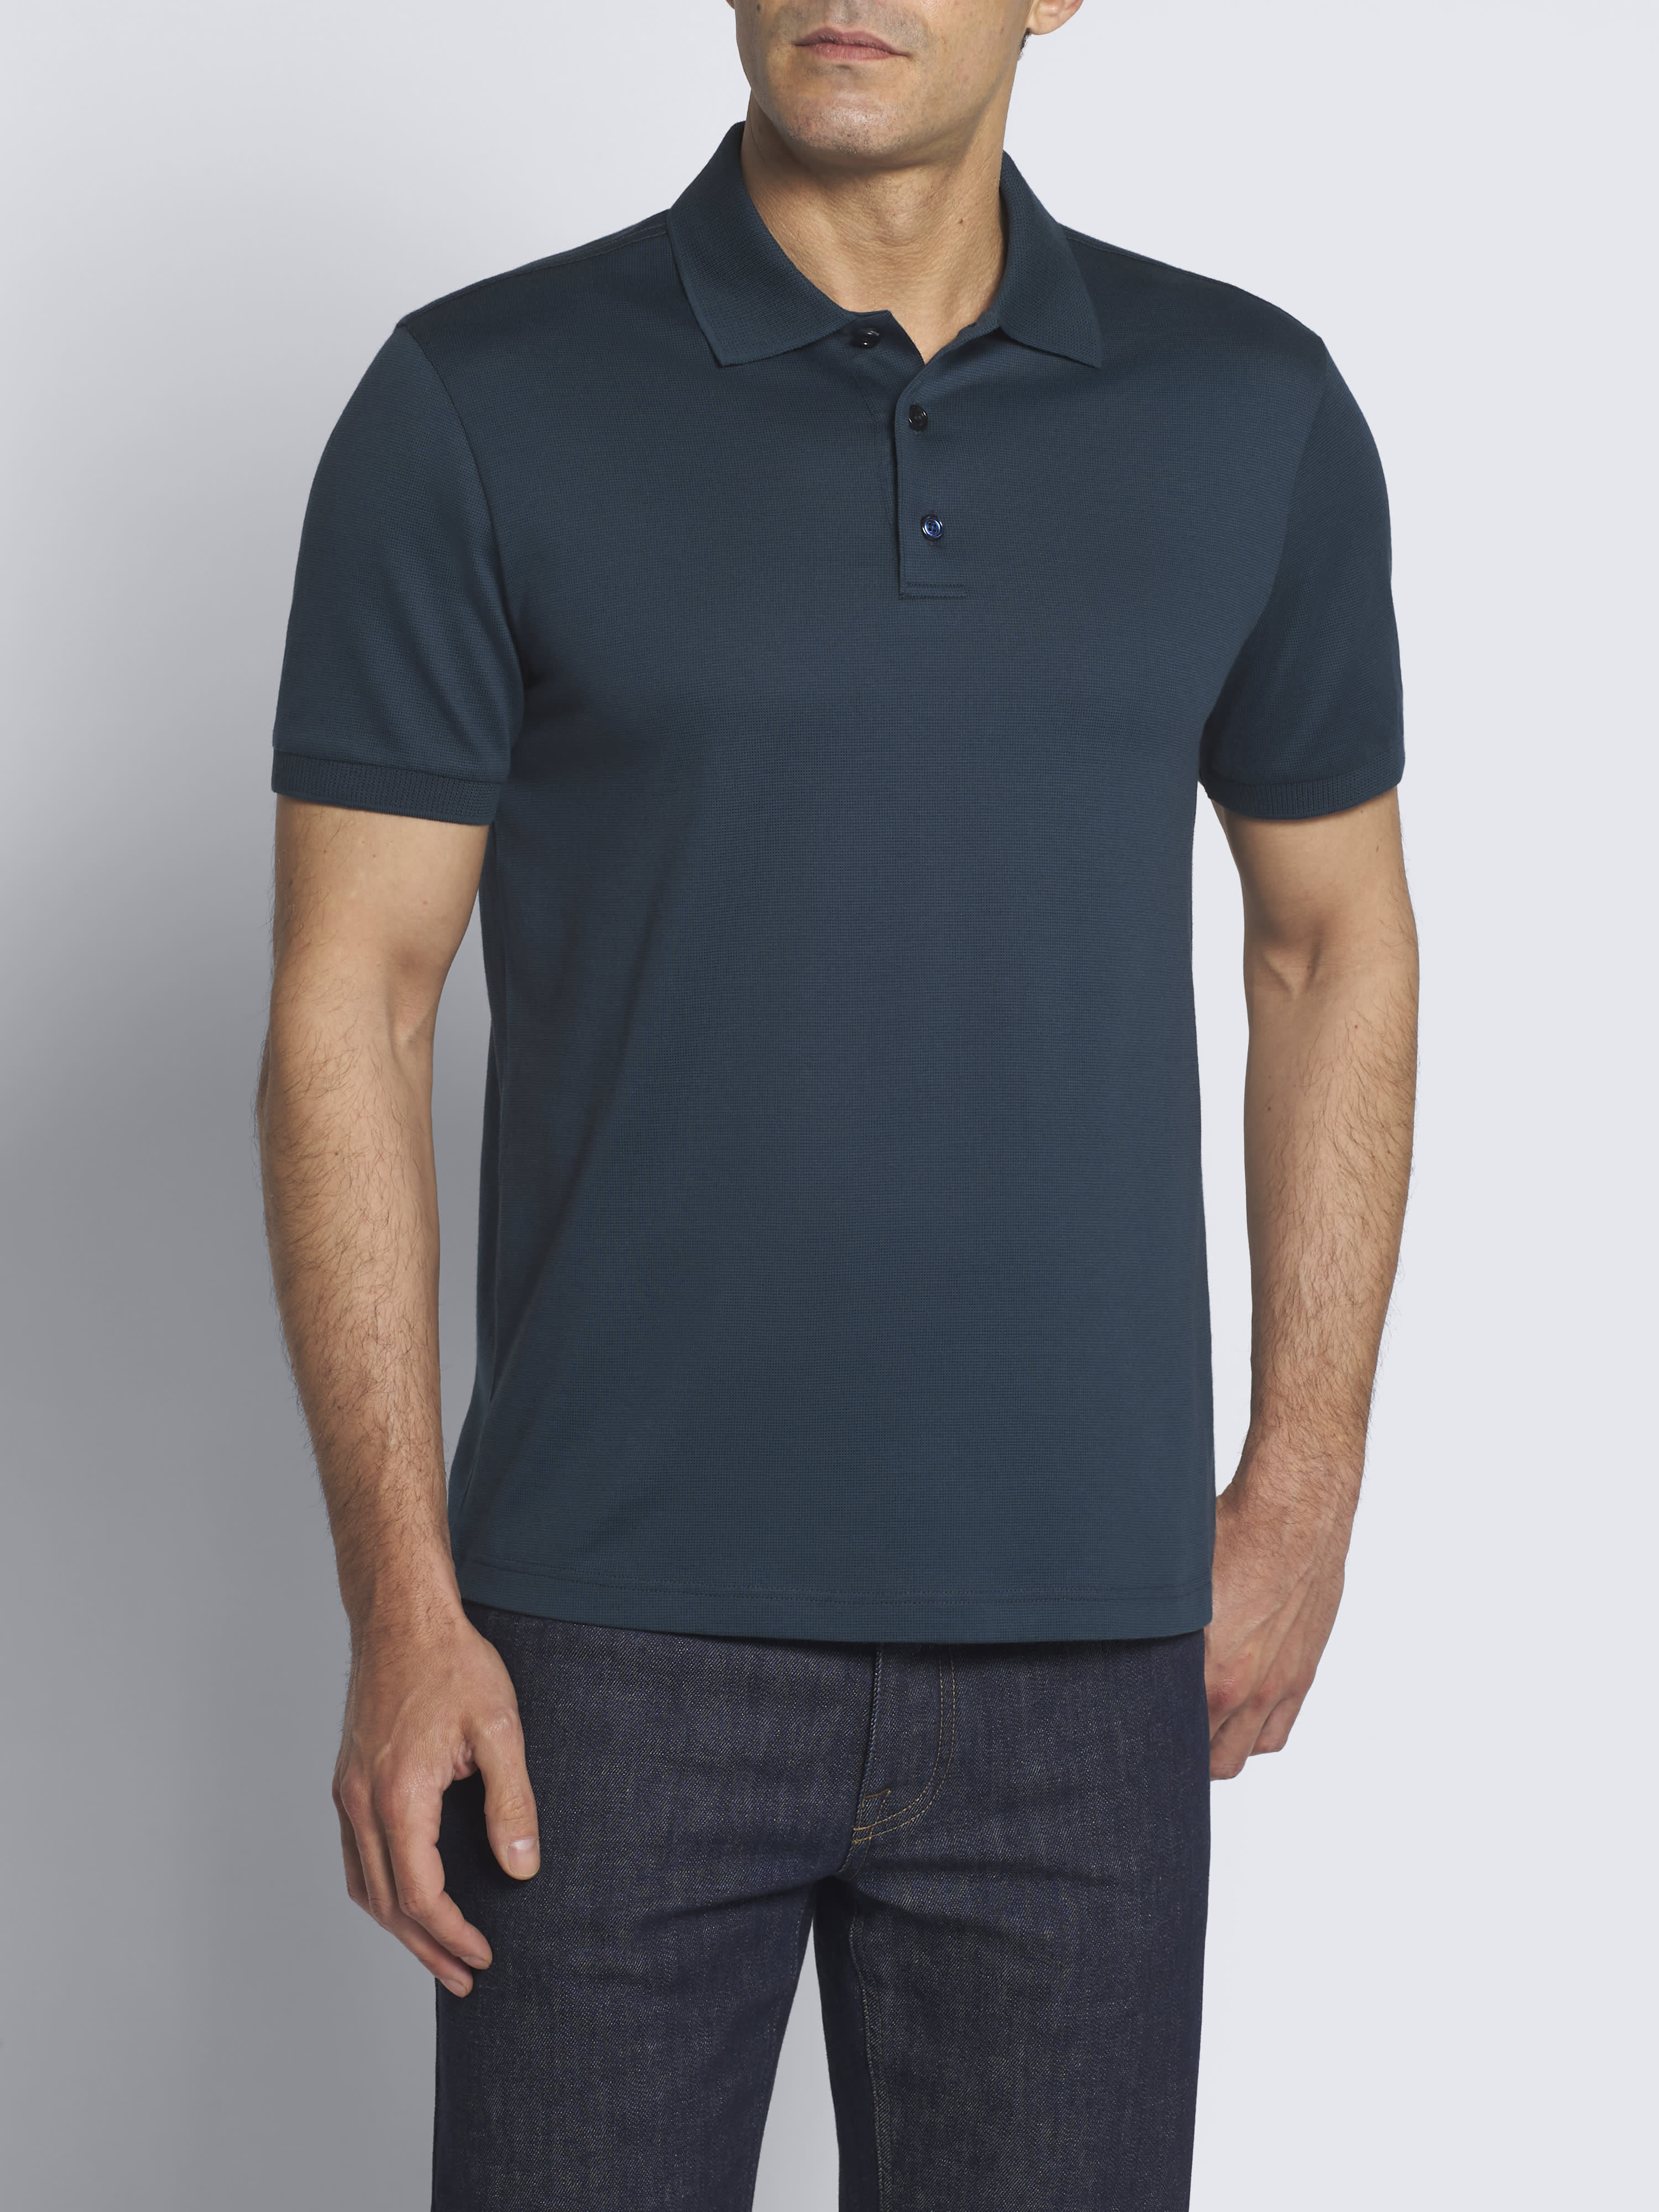 Teal green and charcoal grey cotton polo | Brioni® US Official Store